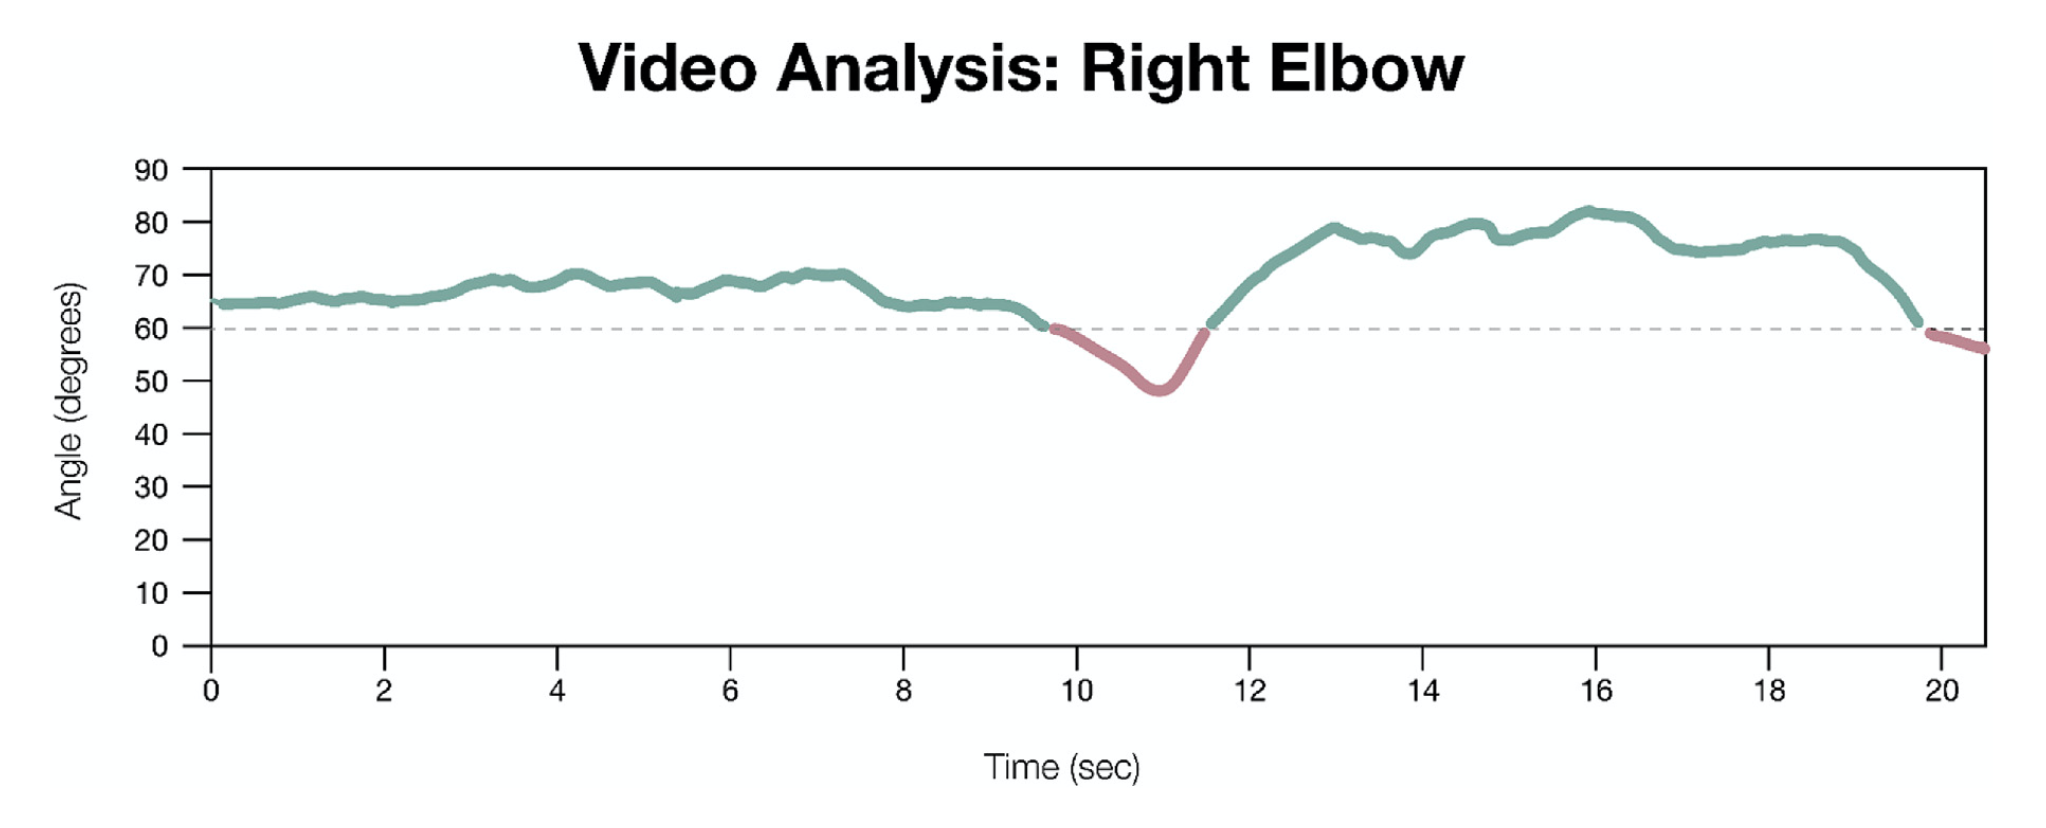 Ergonomics AI Study shows graph of time vs elbow angle. The graph shows the result of a 20 second time period where a surgeon's elbow moved into an unsafe angle >60 degrees. Image shows the possibilities of AI and ergonomics.